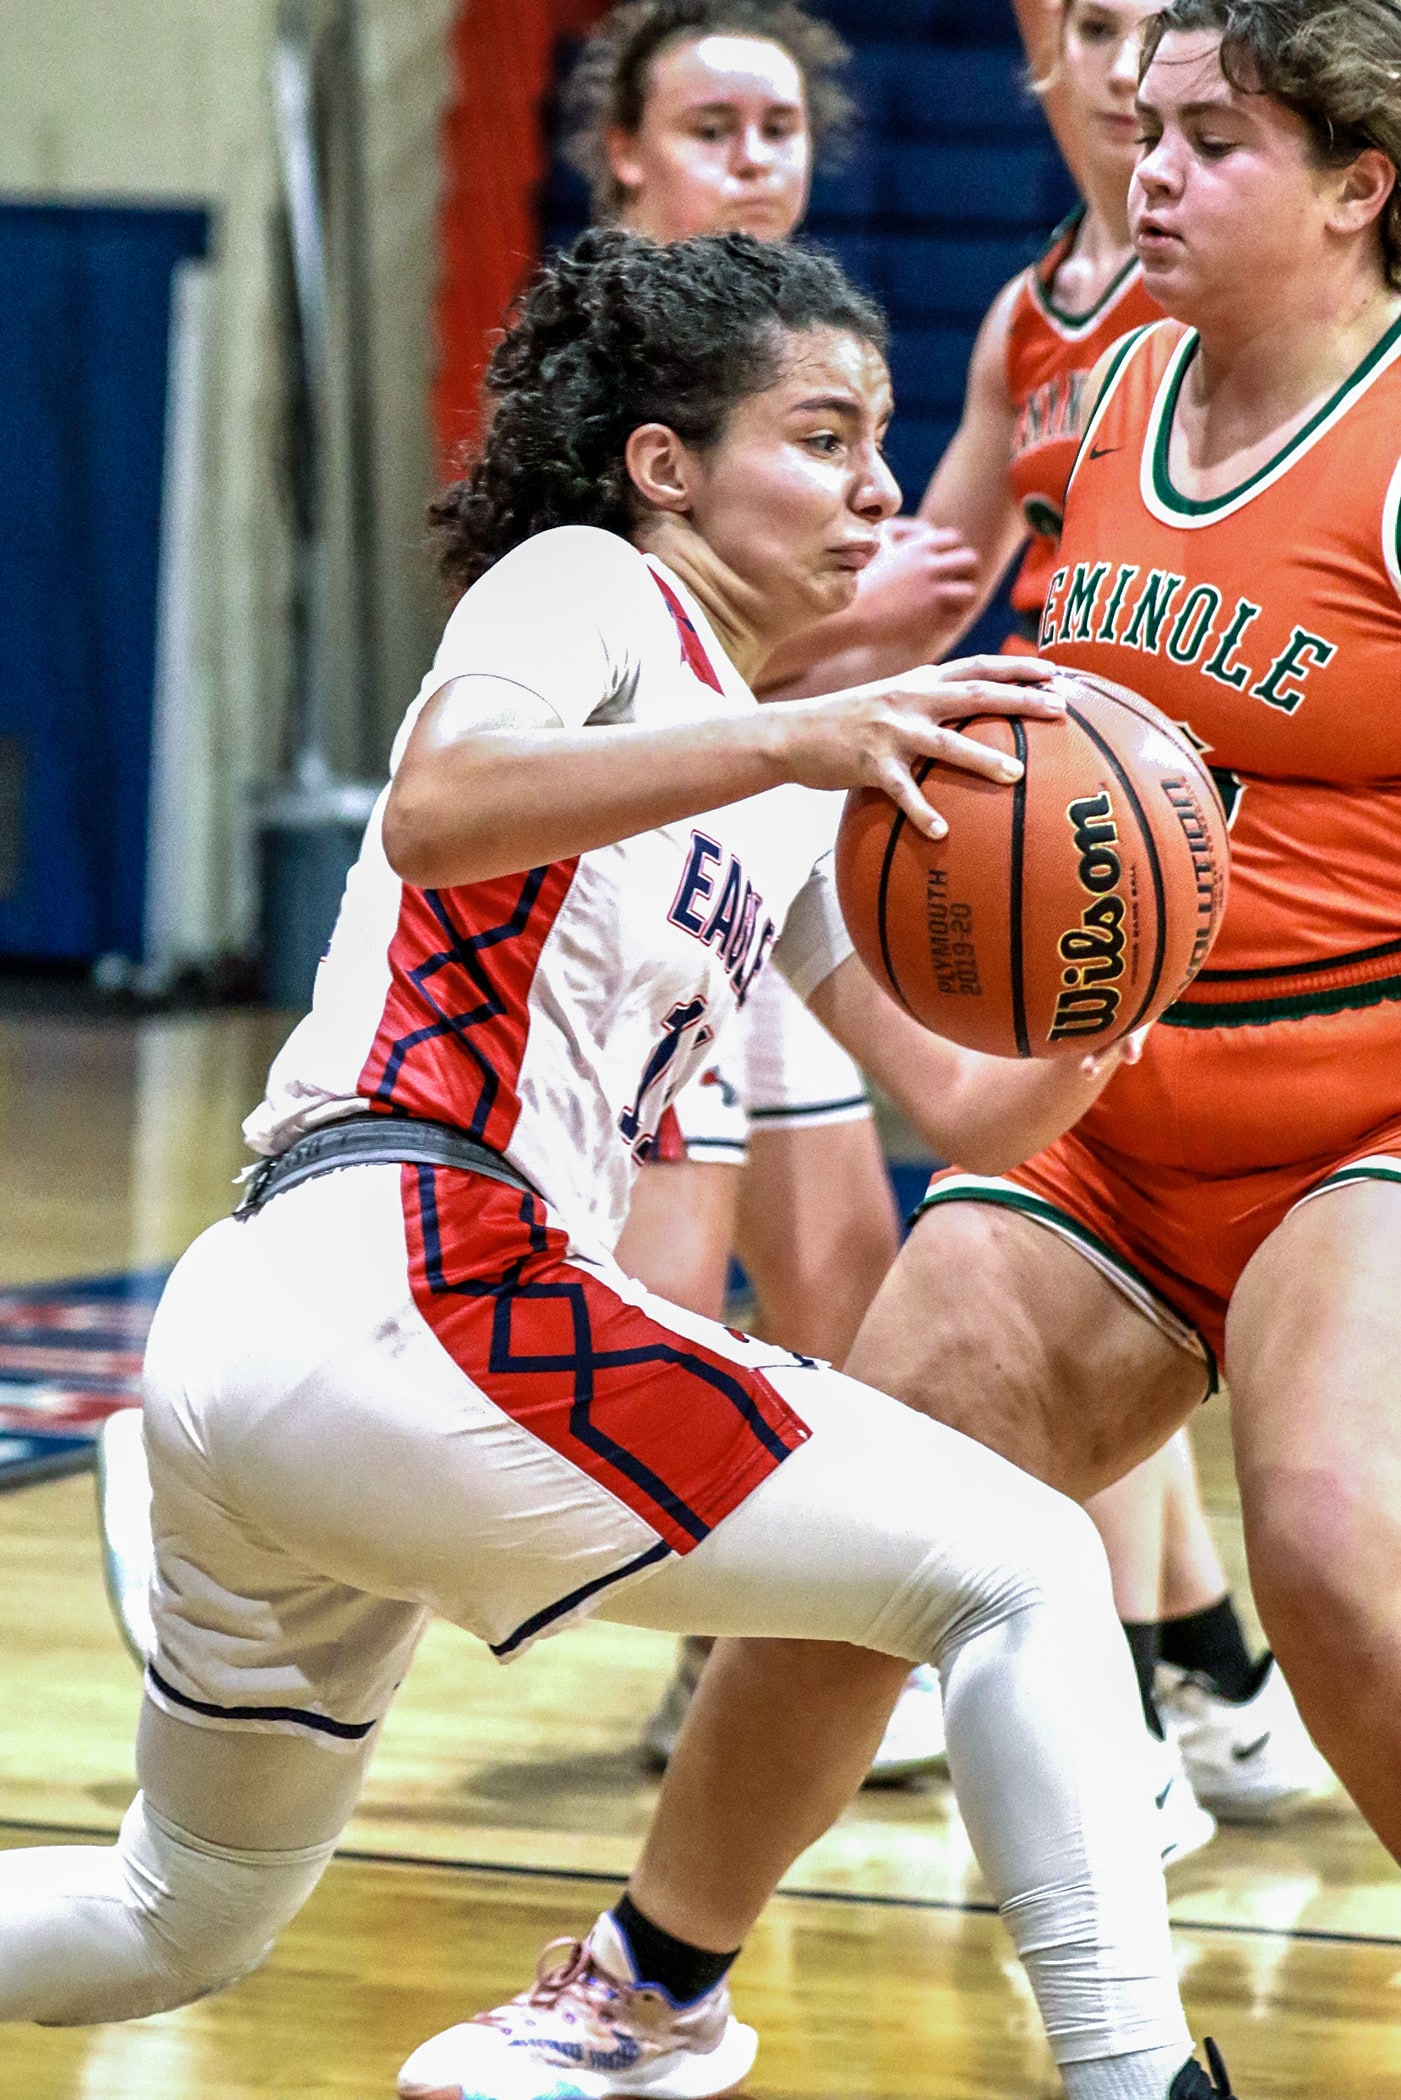 Tuesday night Warhawks take on Eagles in Girls Basketball November 22, 2022. Eagels 11 Jr. Samantha Suarez fights against the Warhawks to keep control of the ball. Photo by Cheryl Clanton.